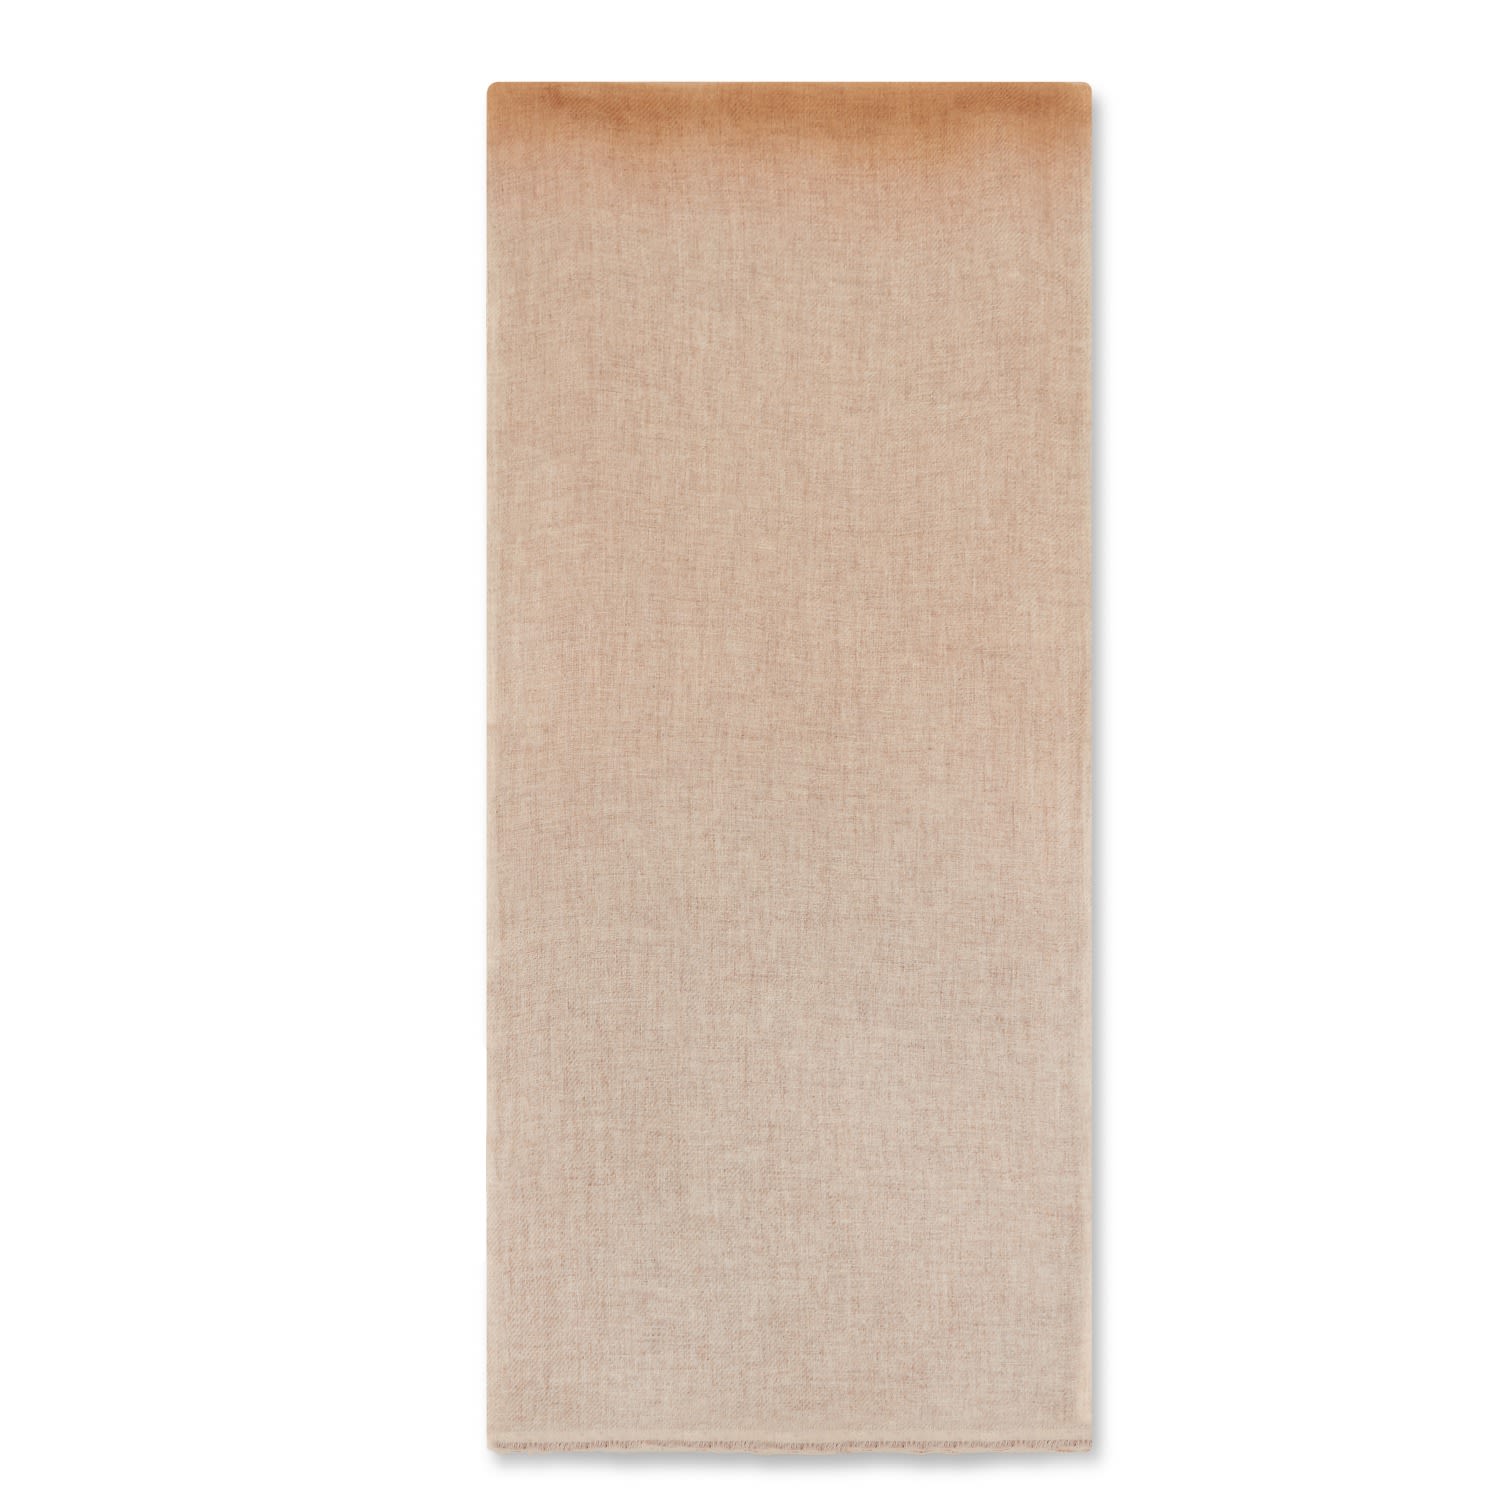 Burrows And Hare Men's Neutrals Cashmere & Merino Wool Scarf - Beige & Brown